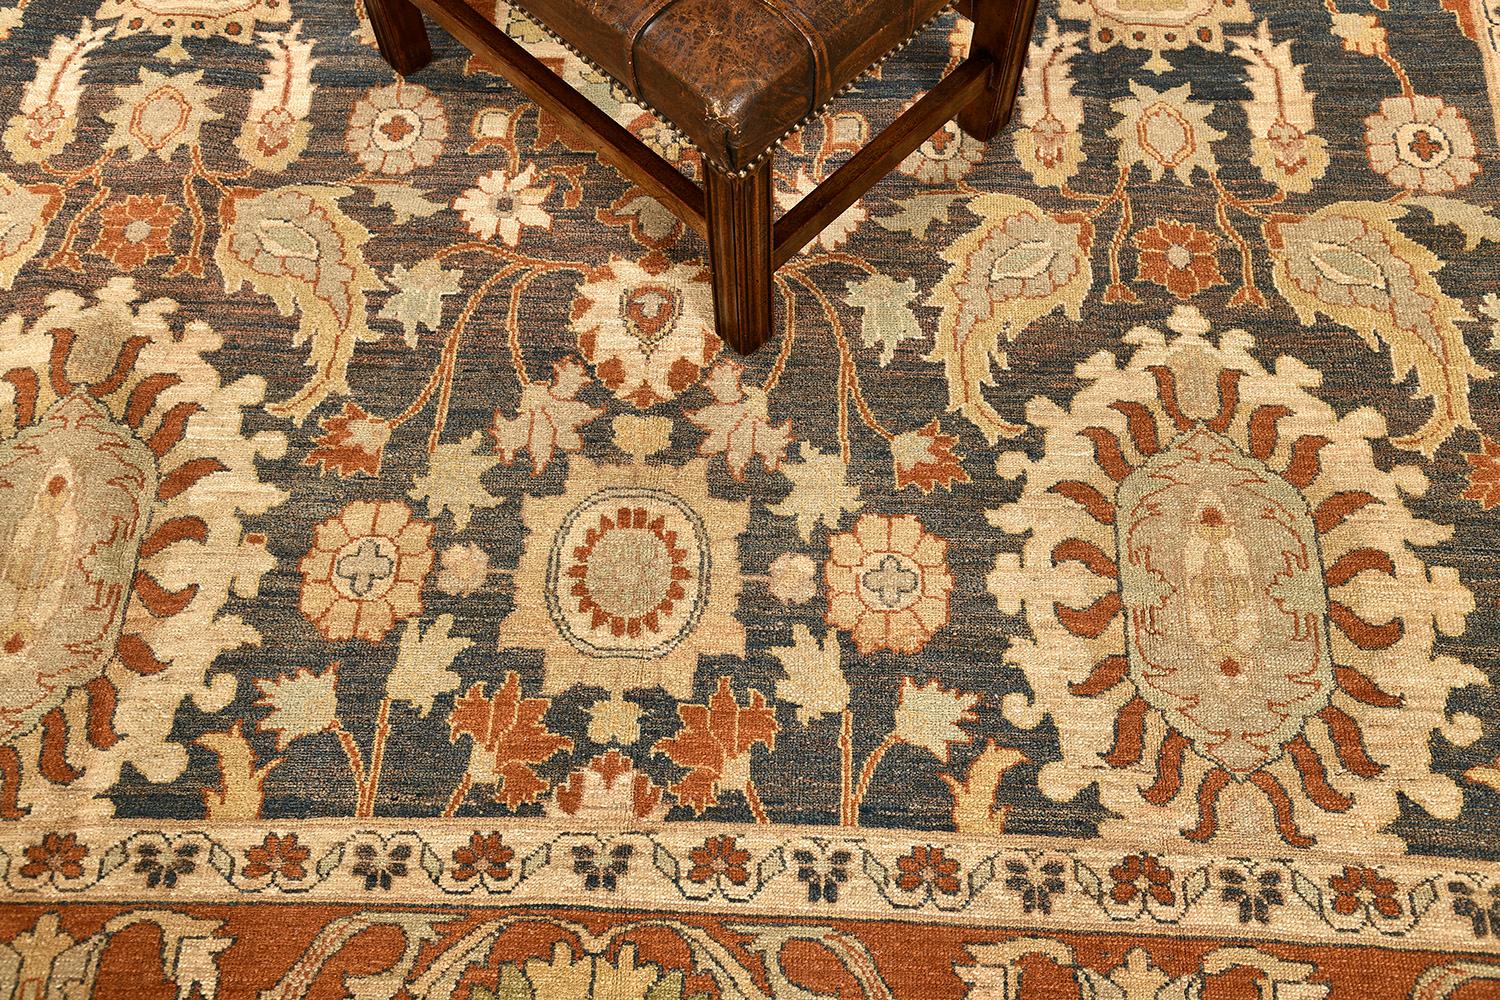 This elegant and timeless Sultanabad rug made from vegetable dye has an intricate symmetric pattern and has clear grandiose medallions all over the design. The details of these patterns are perfectly spun in midnight blue field terracotta borders